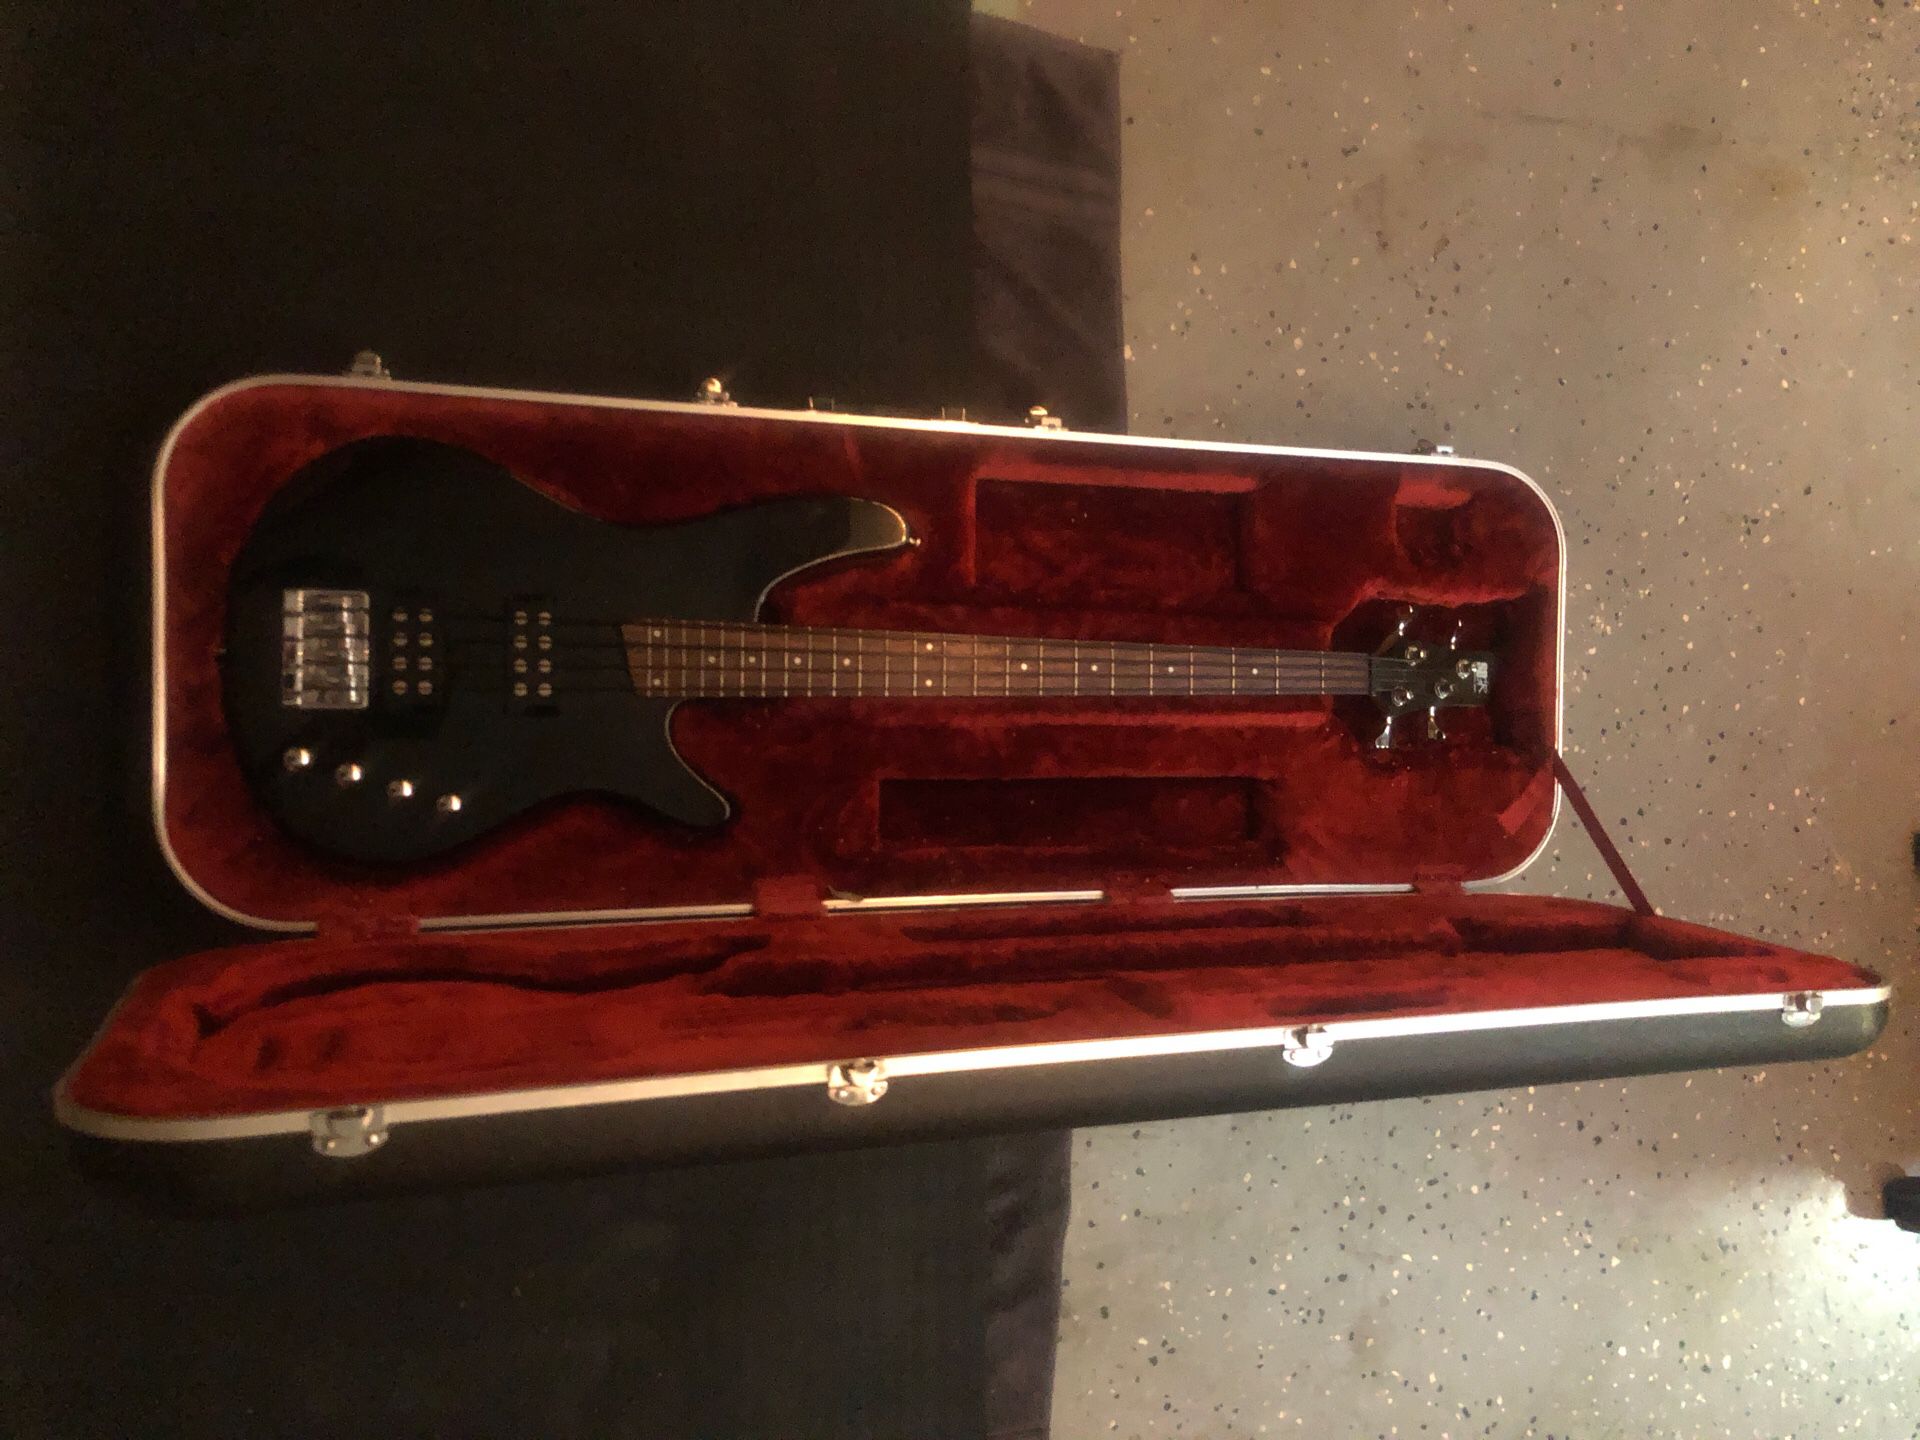 Ibanez bass sdgr 300 and hard case